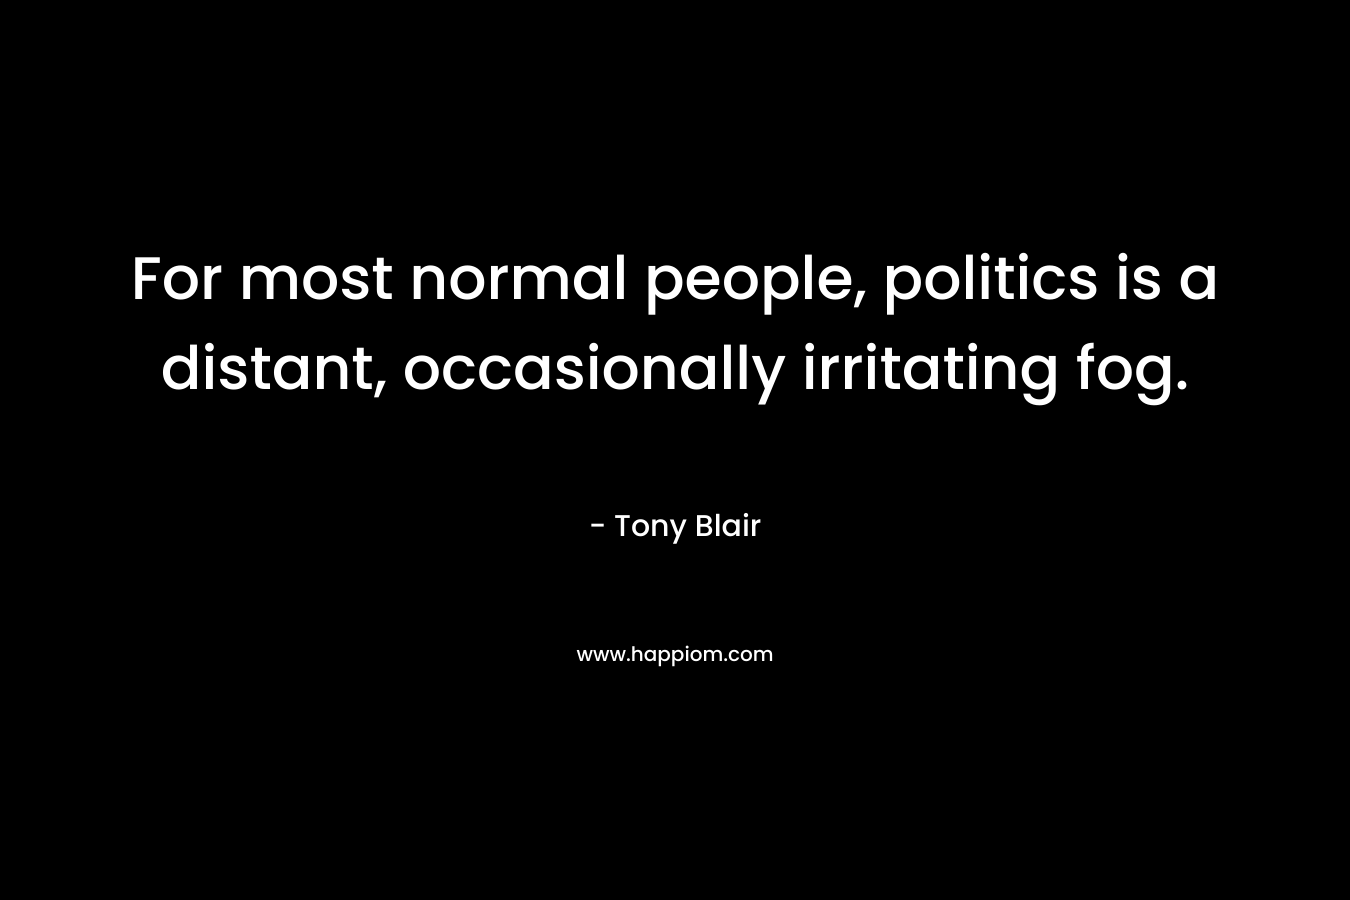 For most normal people, politics is a distant, occasionally irritating fog. – Tony Blair